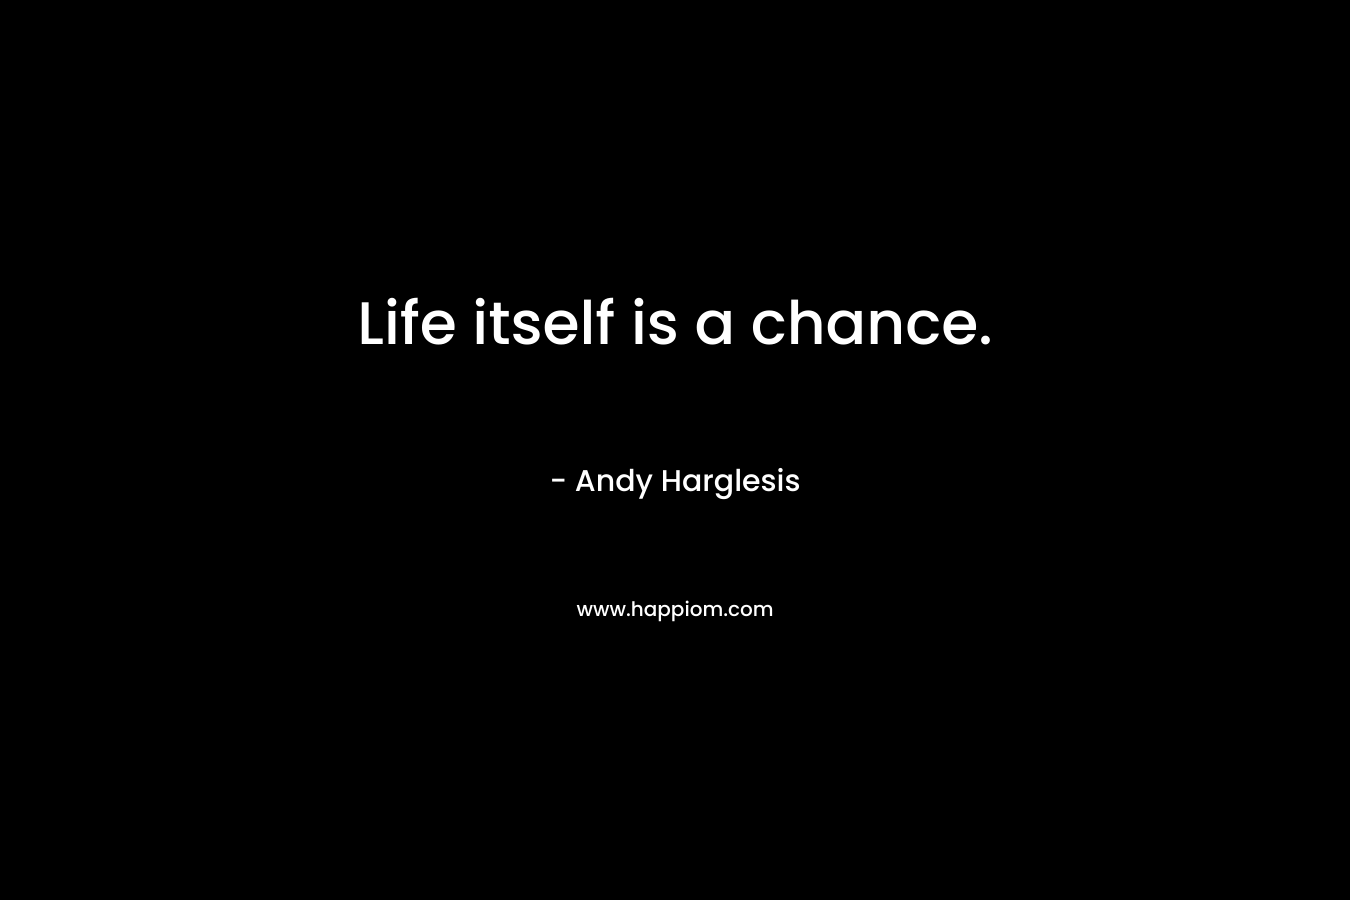 Life itself is a chance.